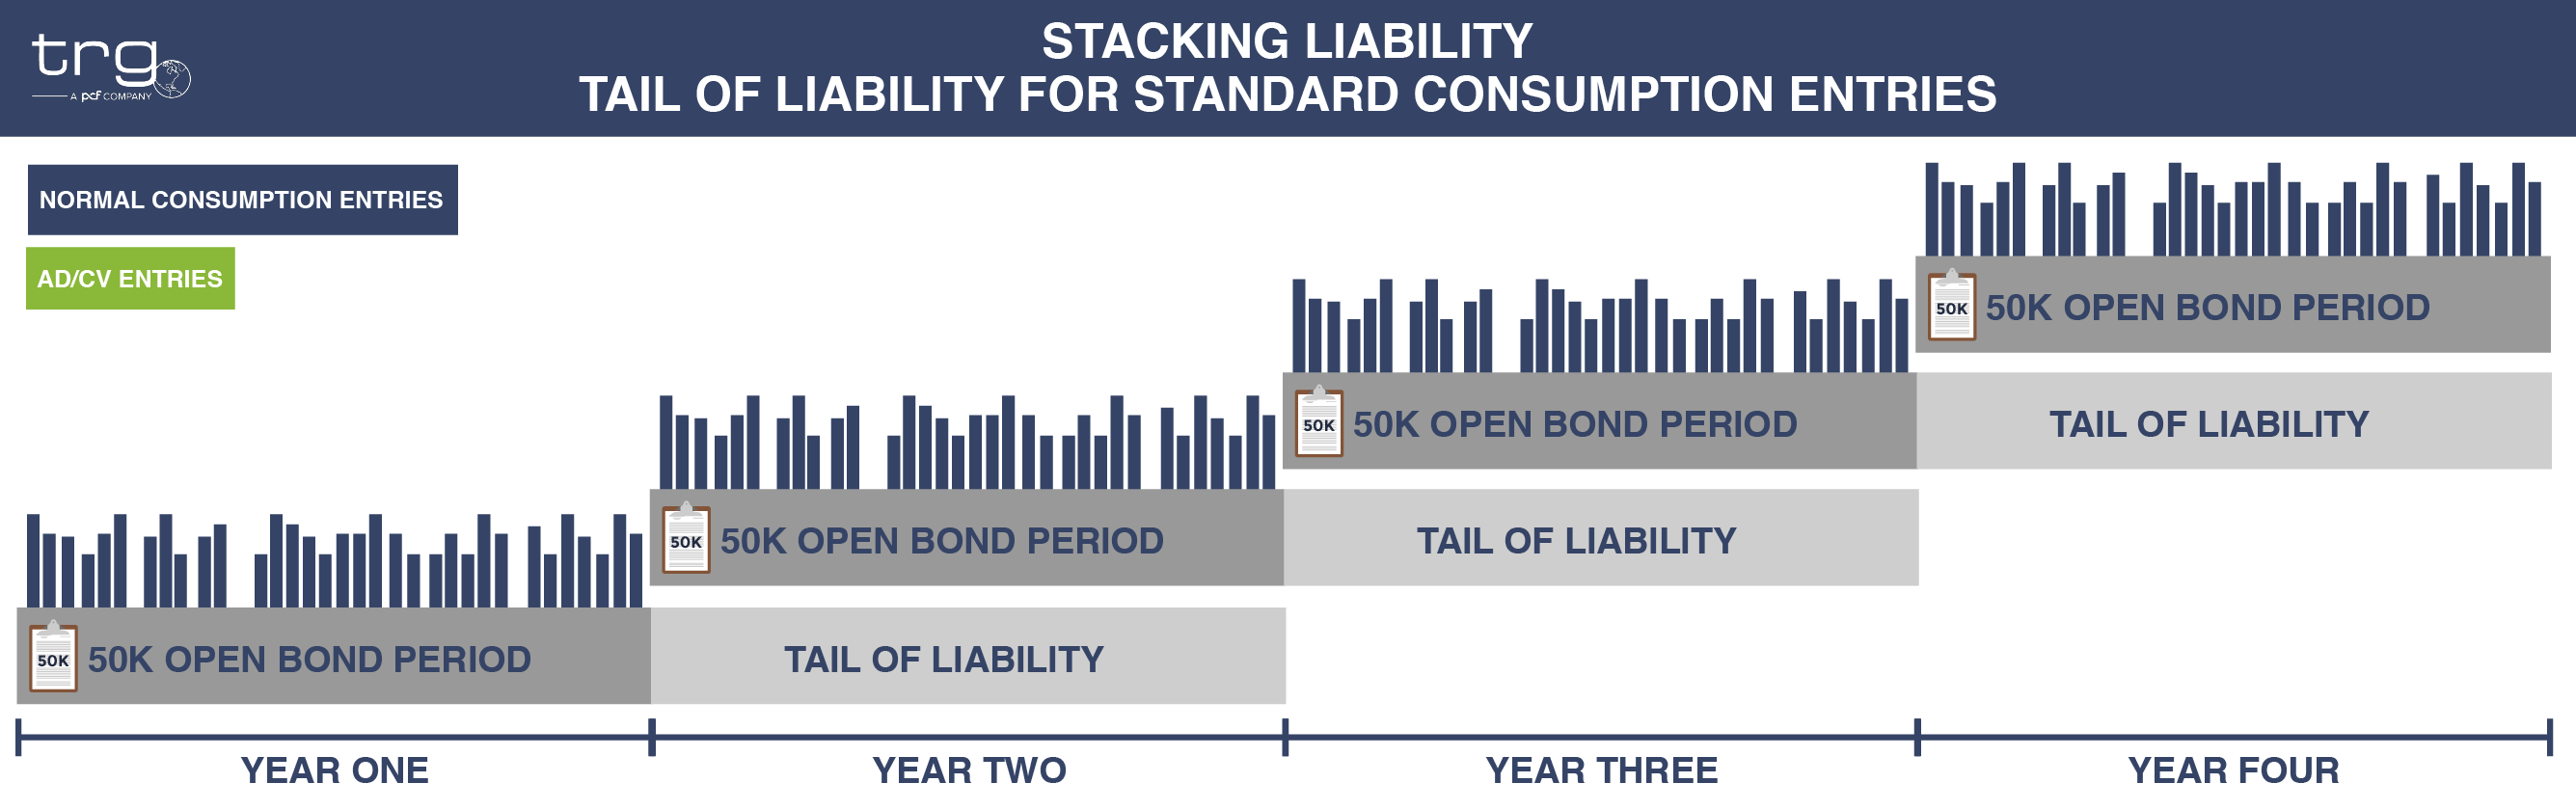 A graphic showing the tailing of liability when an importer makes only standard consumption entries into the United States.